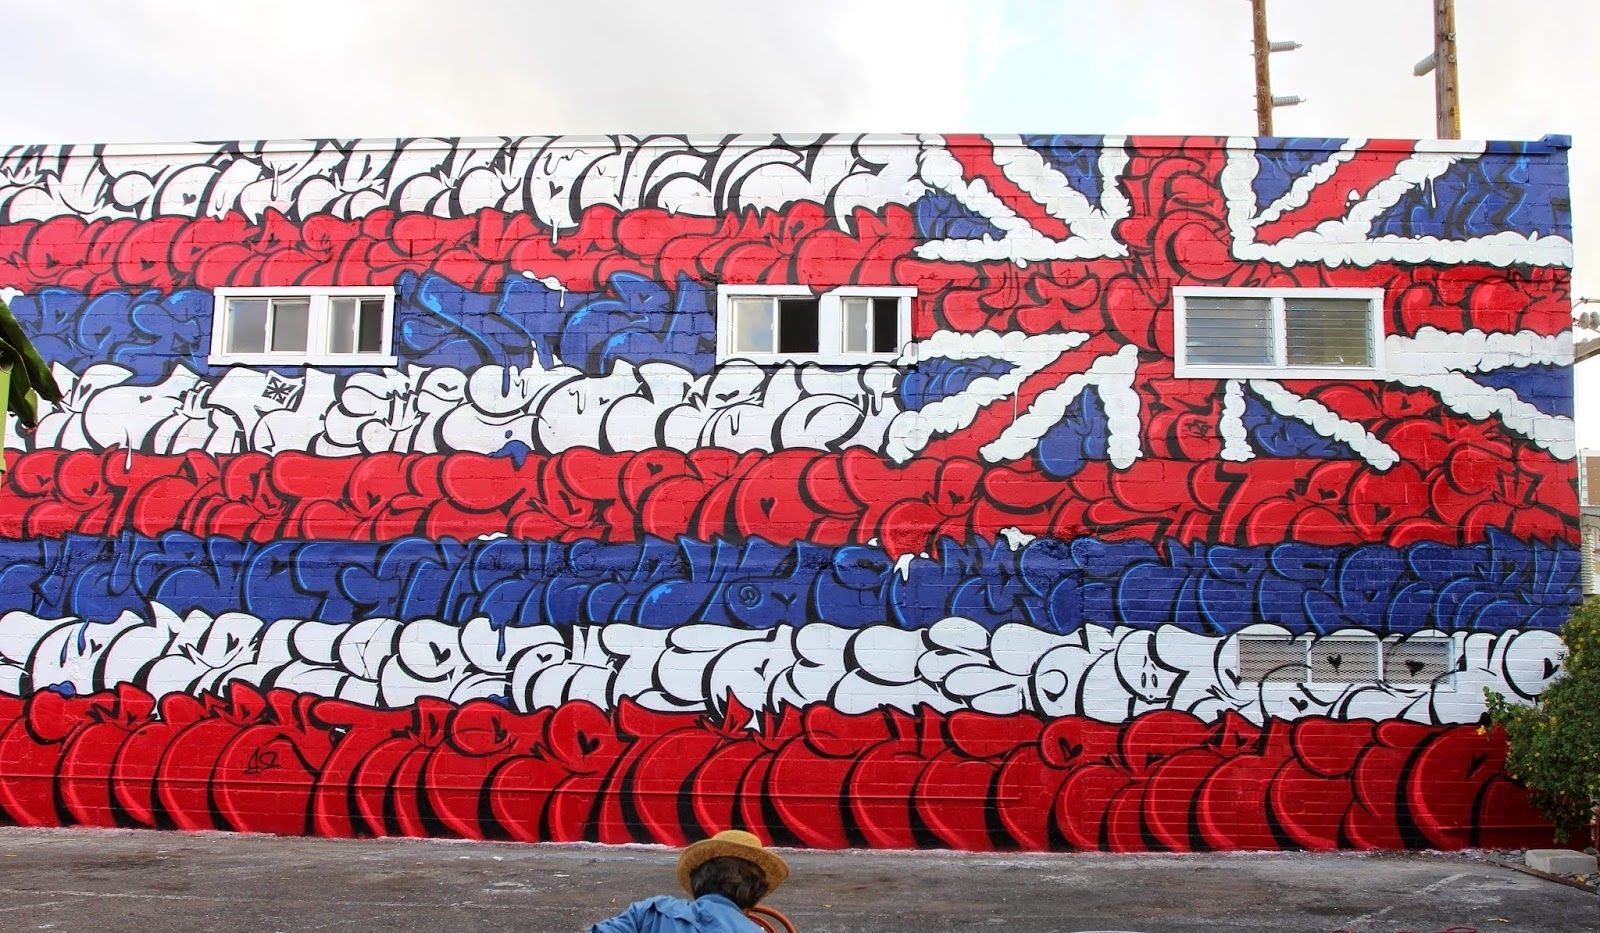 Hawaiian Wall Art Intended For Well Known Pow! Wow! Hawaii '15: Og Slick Creates A New Mural At Fresh Cafe (View 10 of 15)